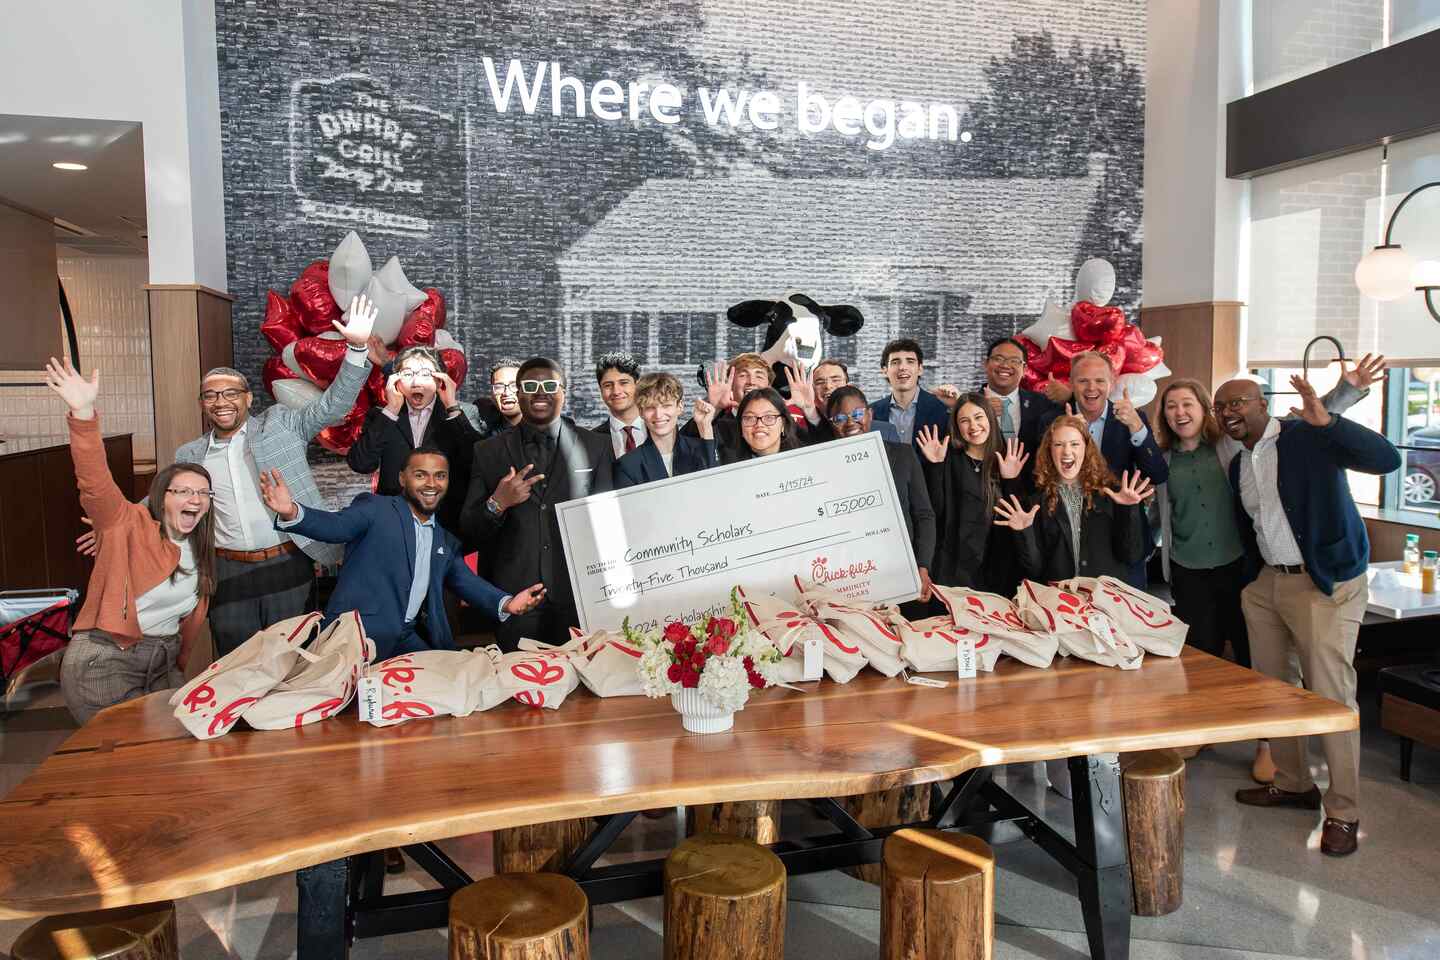 The recipients of the 2024 Chick-fil-A Community Scholarship posing with a large check behind a wall that depicts the Dwarf House and reads "Where we began."